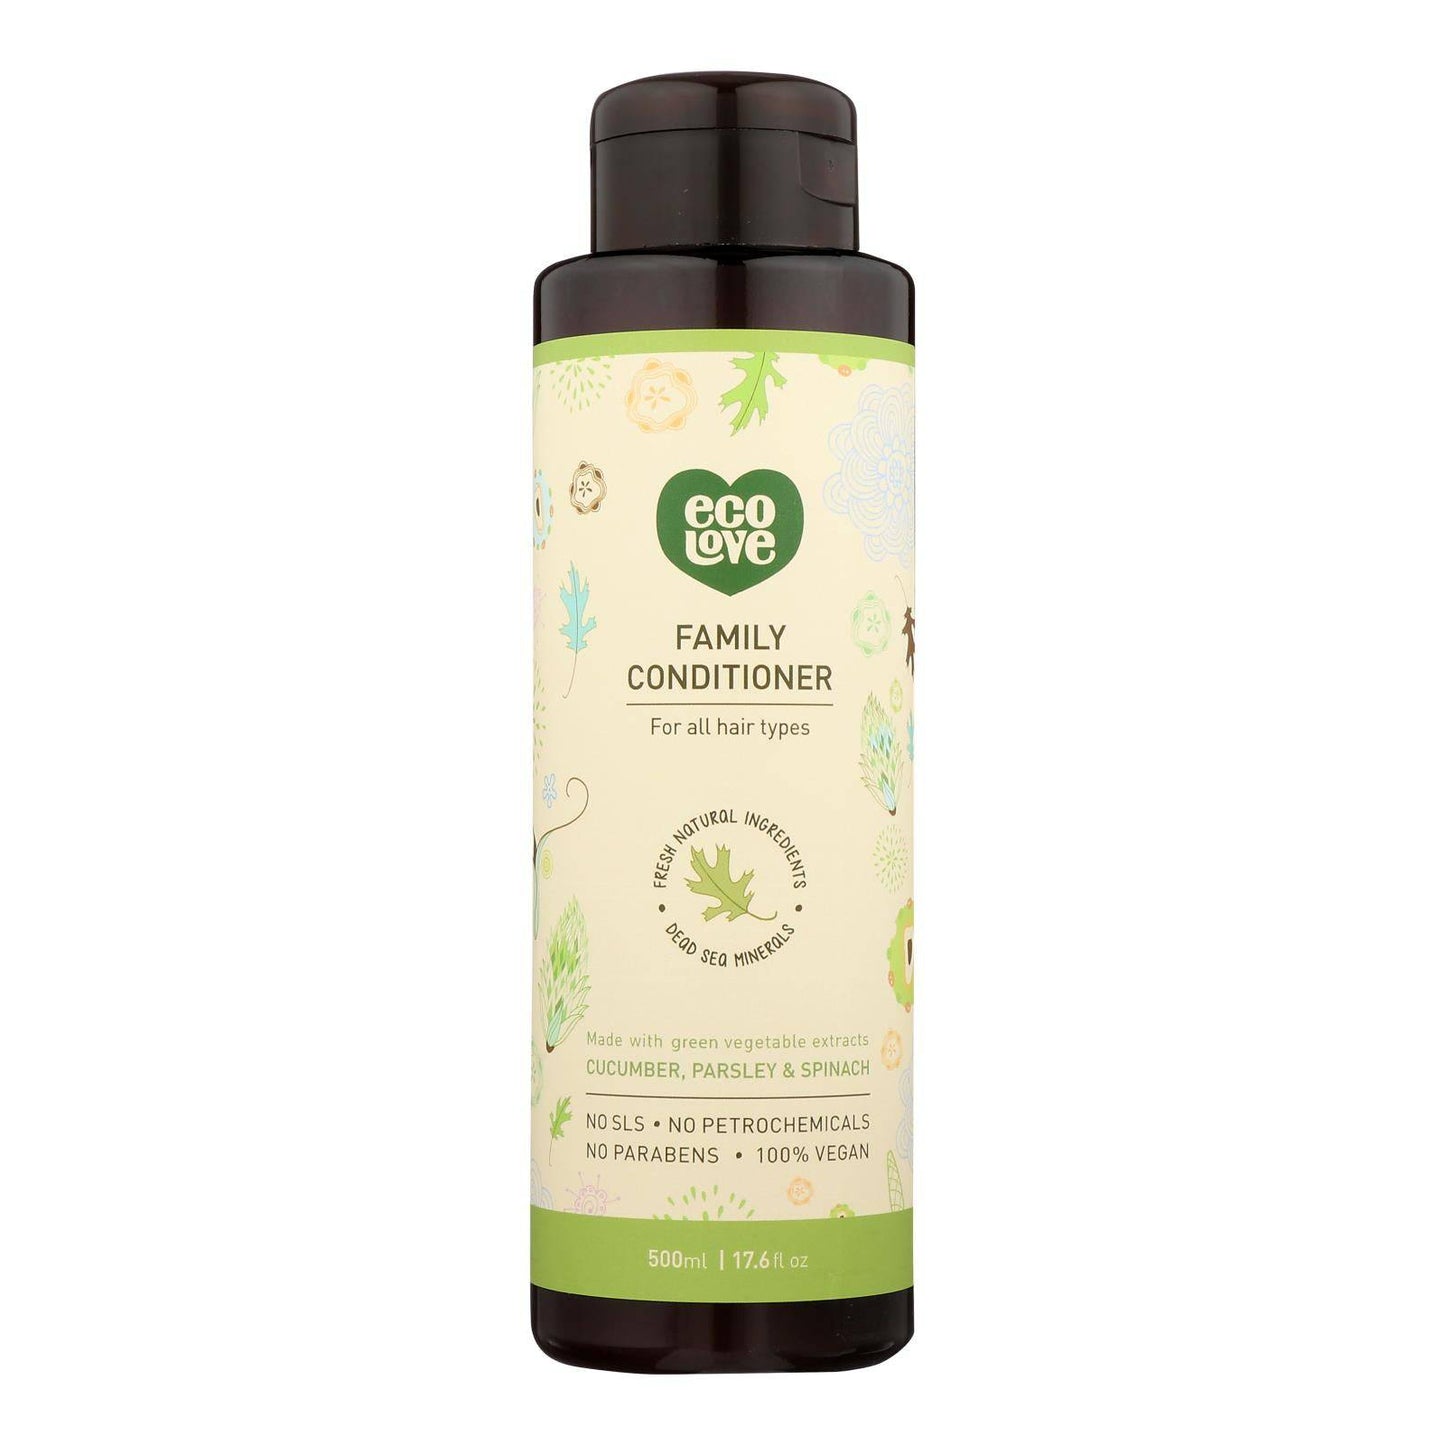 Buy Ecolove Conditioner - Green Vegetables Family Conditioner For All Hair Types - Case Of 1 - 17.6 Fl Oz.  at OnlyNaturals.us